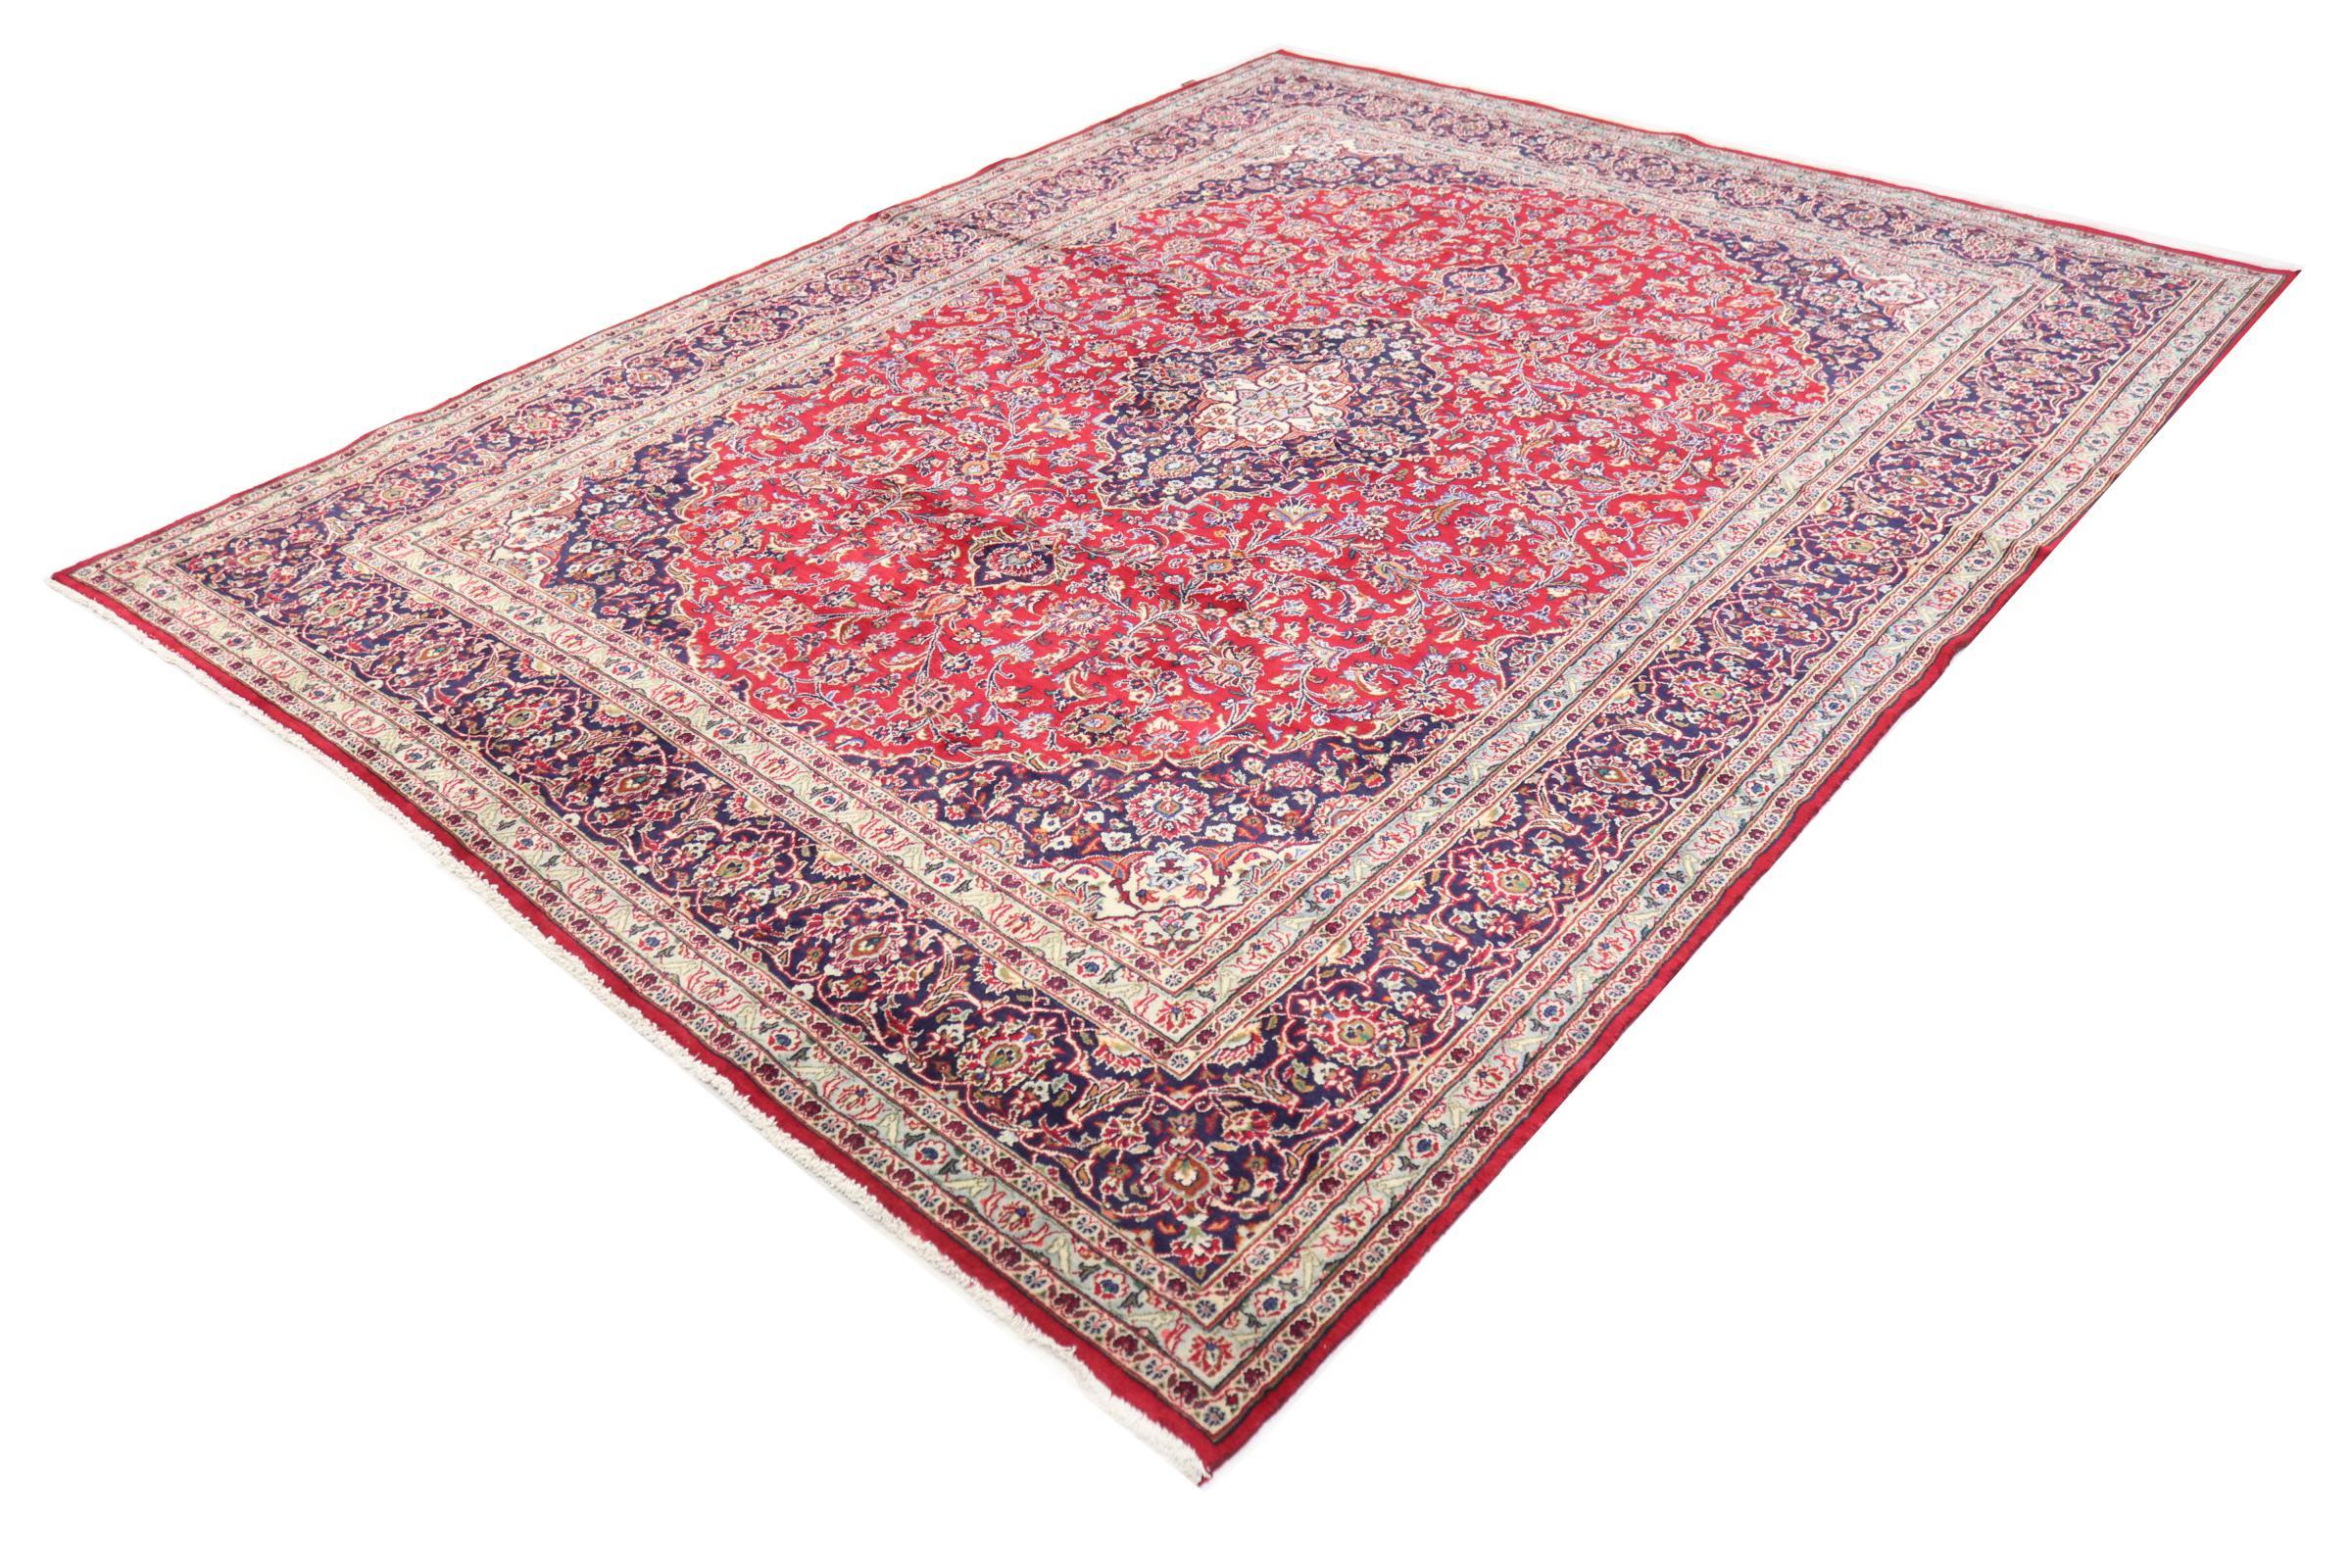 A stunning Persian rug, Keshan, 20th century. 

This rug originates from Keshan also called Kashan in Persia. It counts to the most popular Persian rugs. This Keshan comes in a typical design for its type. It has been crafted by hand from fine